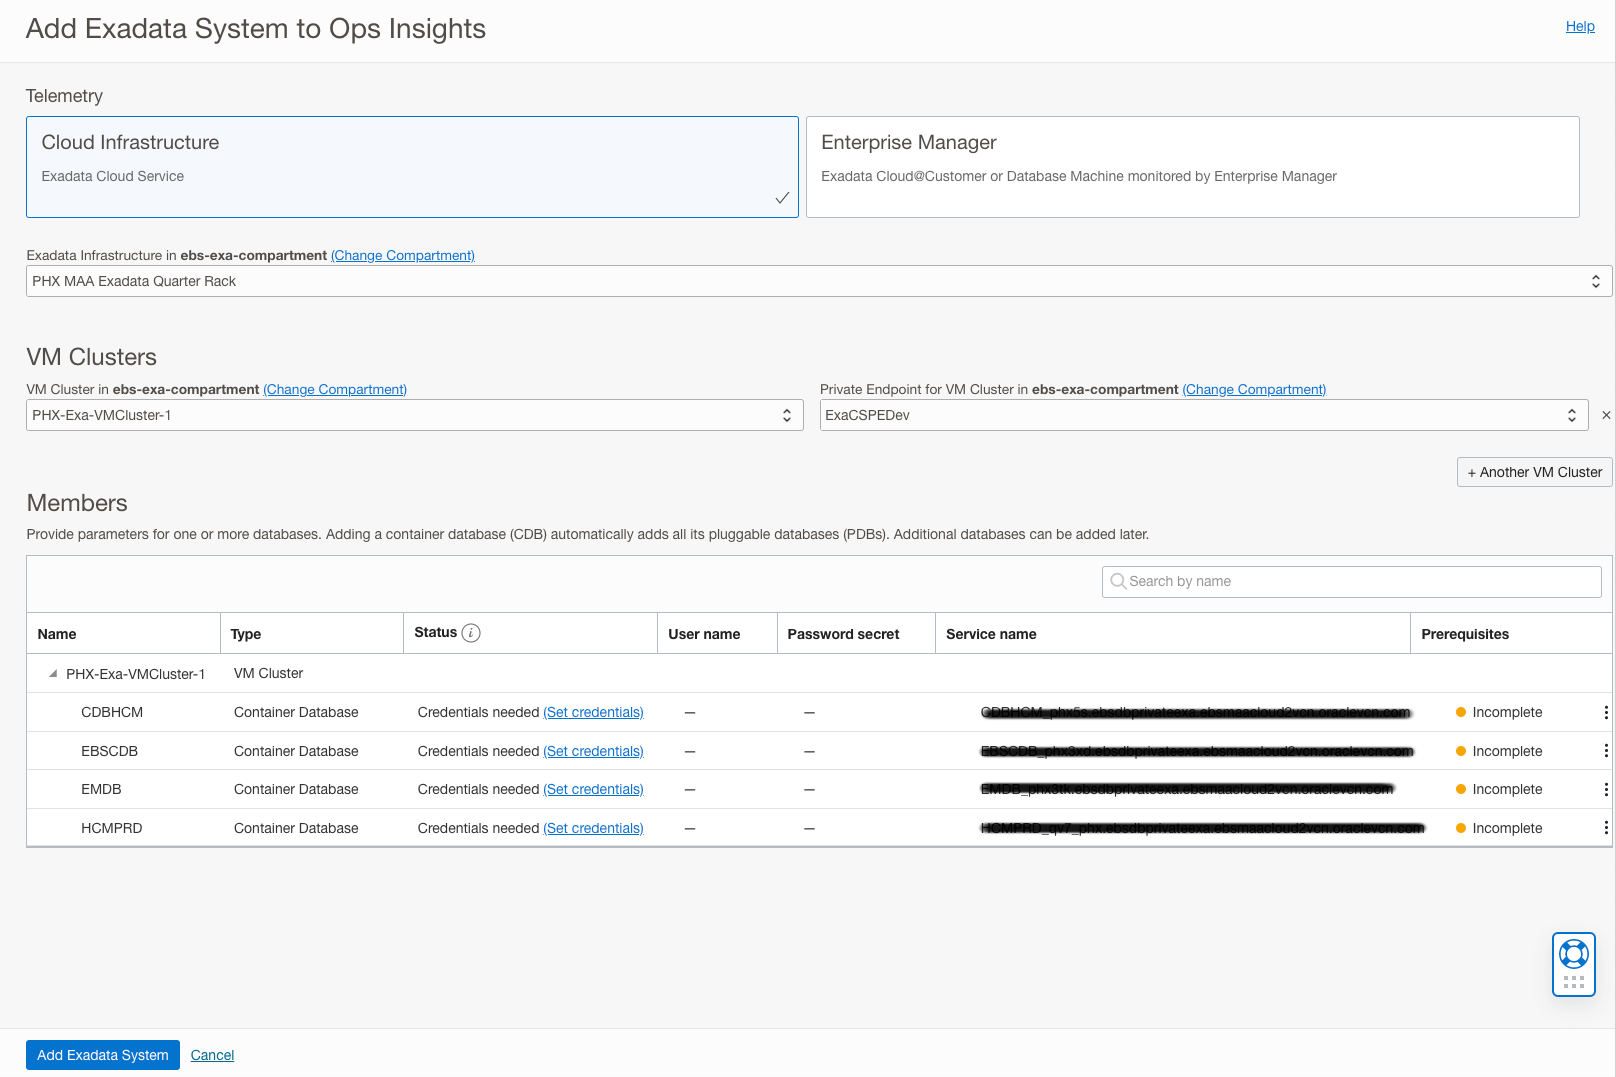 Image shows the Add Exadata System to Ops Insights dialog.